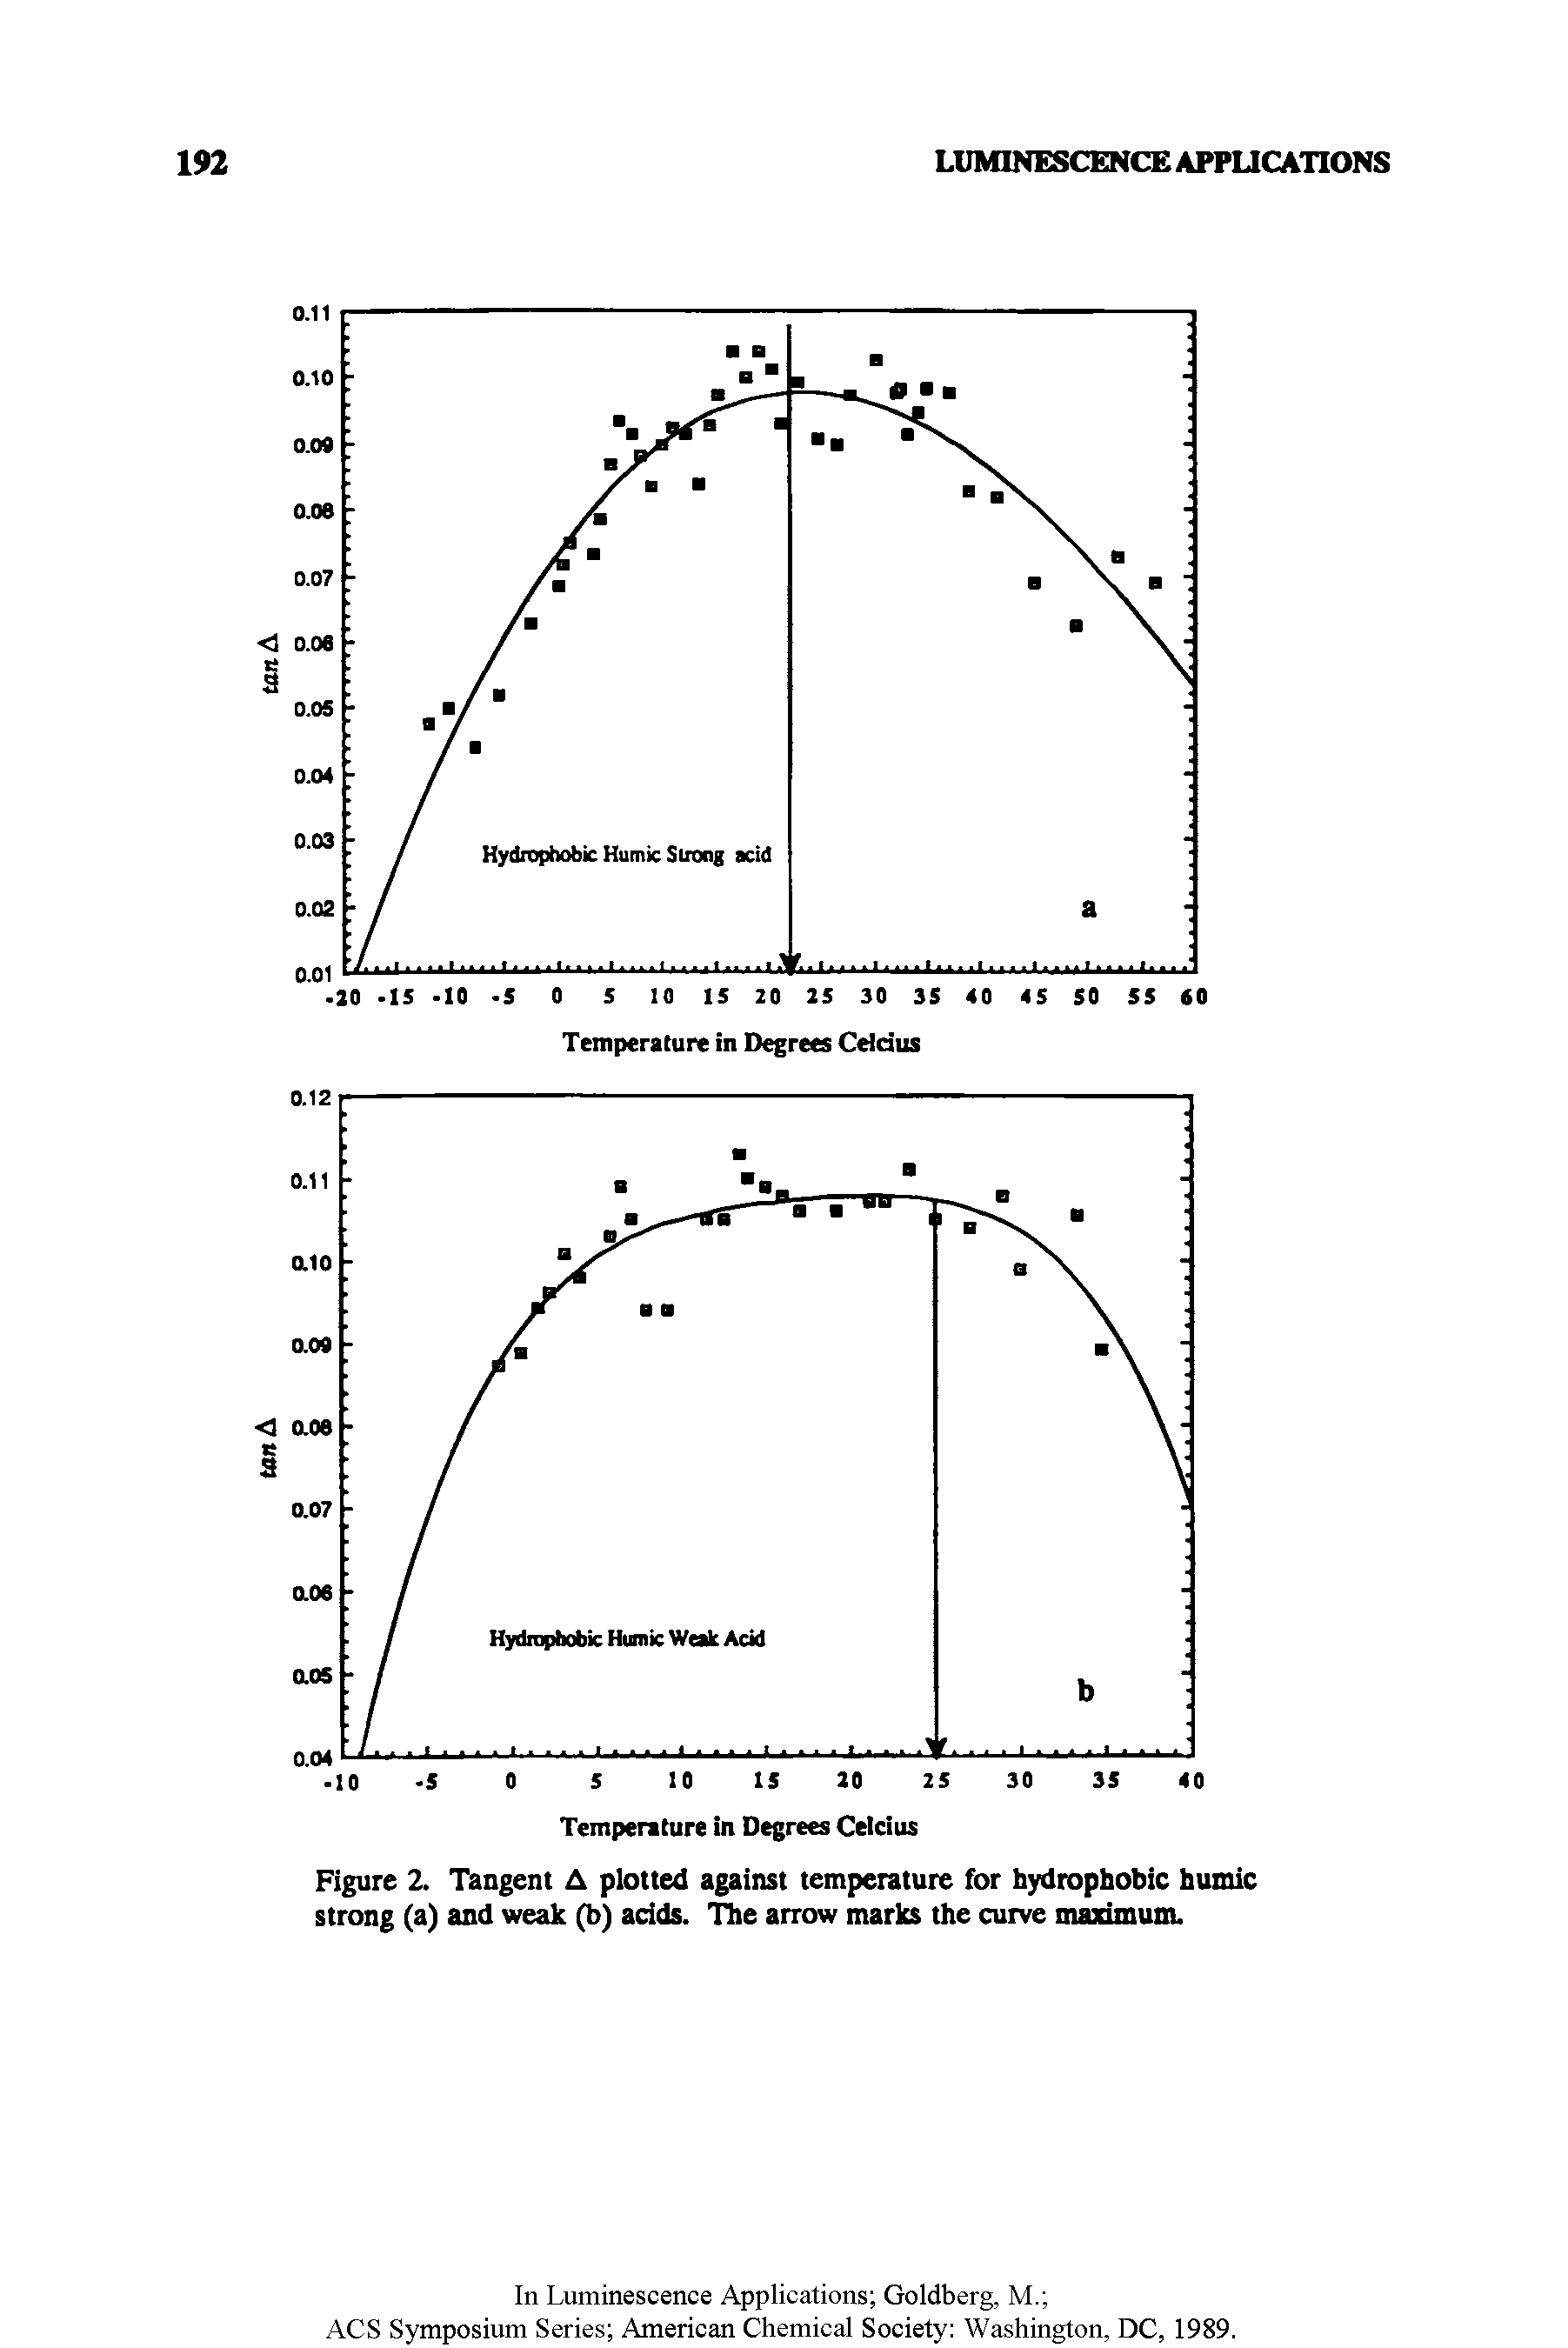 Figure 2. Tangent A plotted against temperature for hydrophobic humic strong (a) and weak (b) acids. The arrow marks the curve maximum.